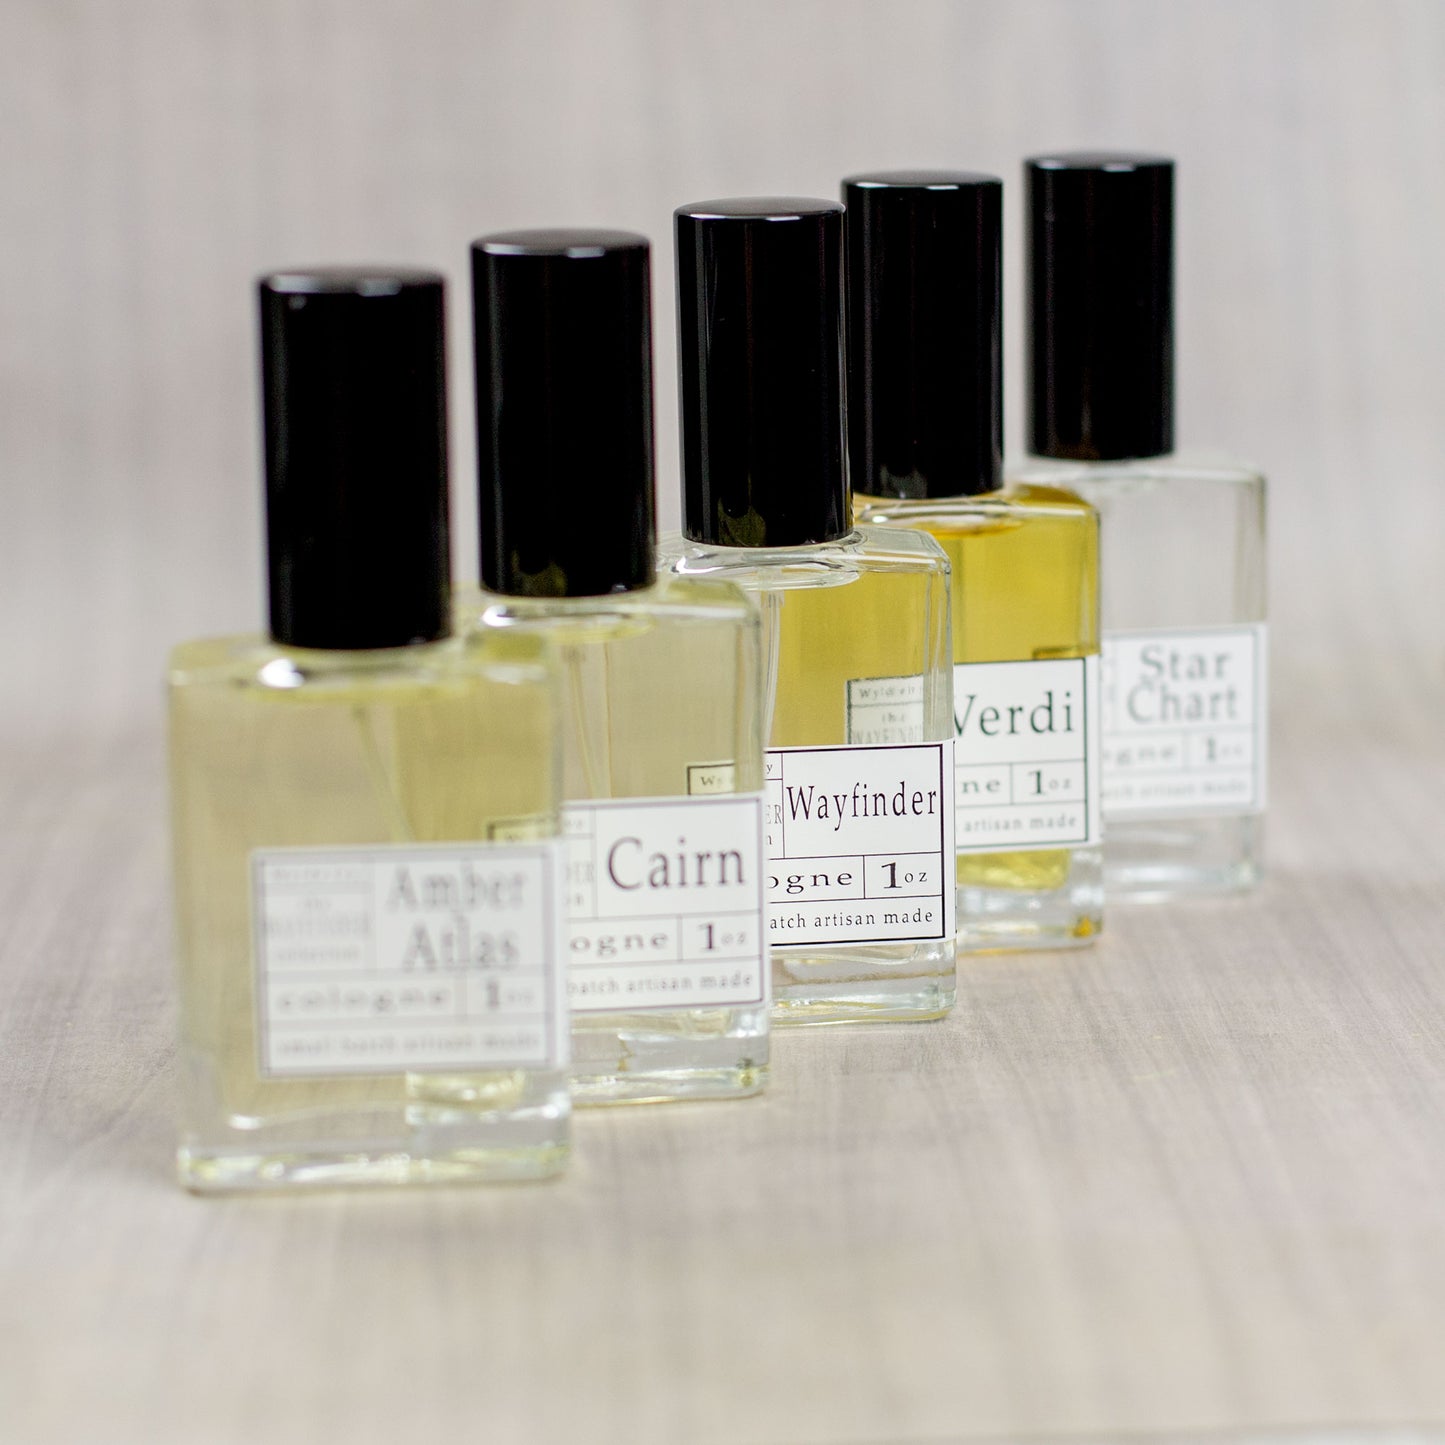 Cairn Cologne